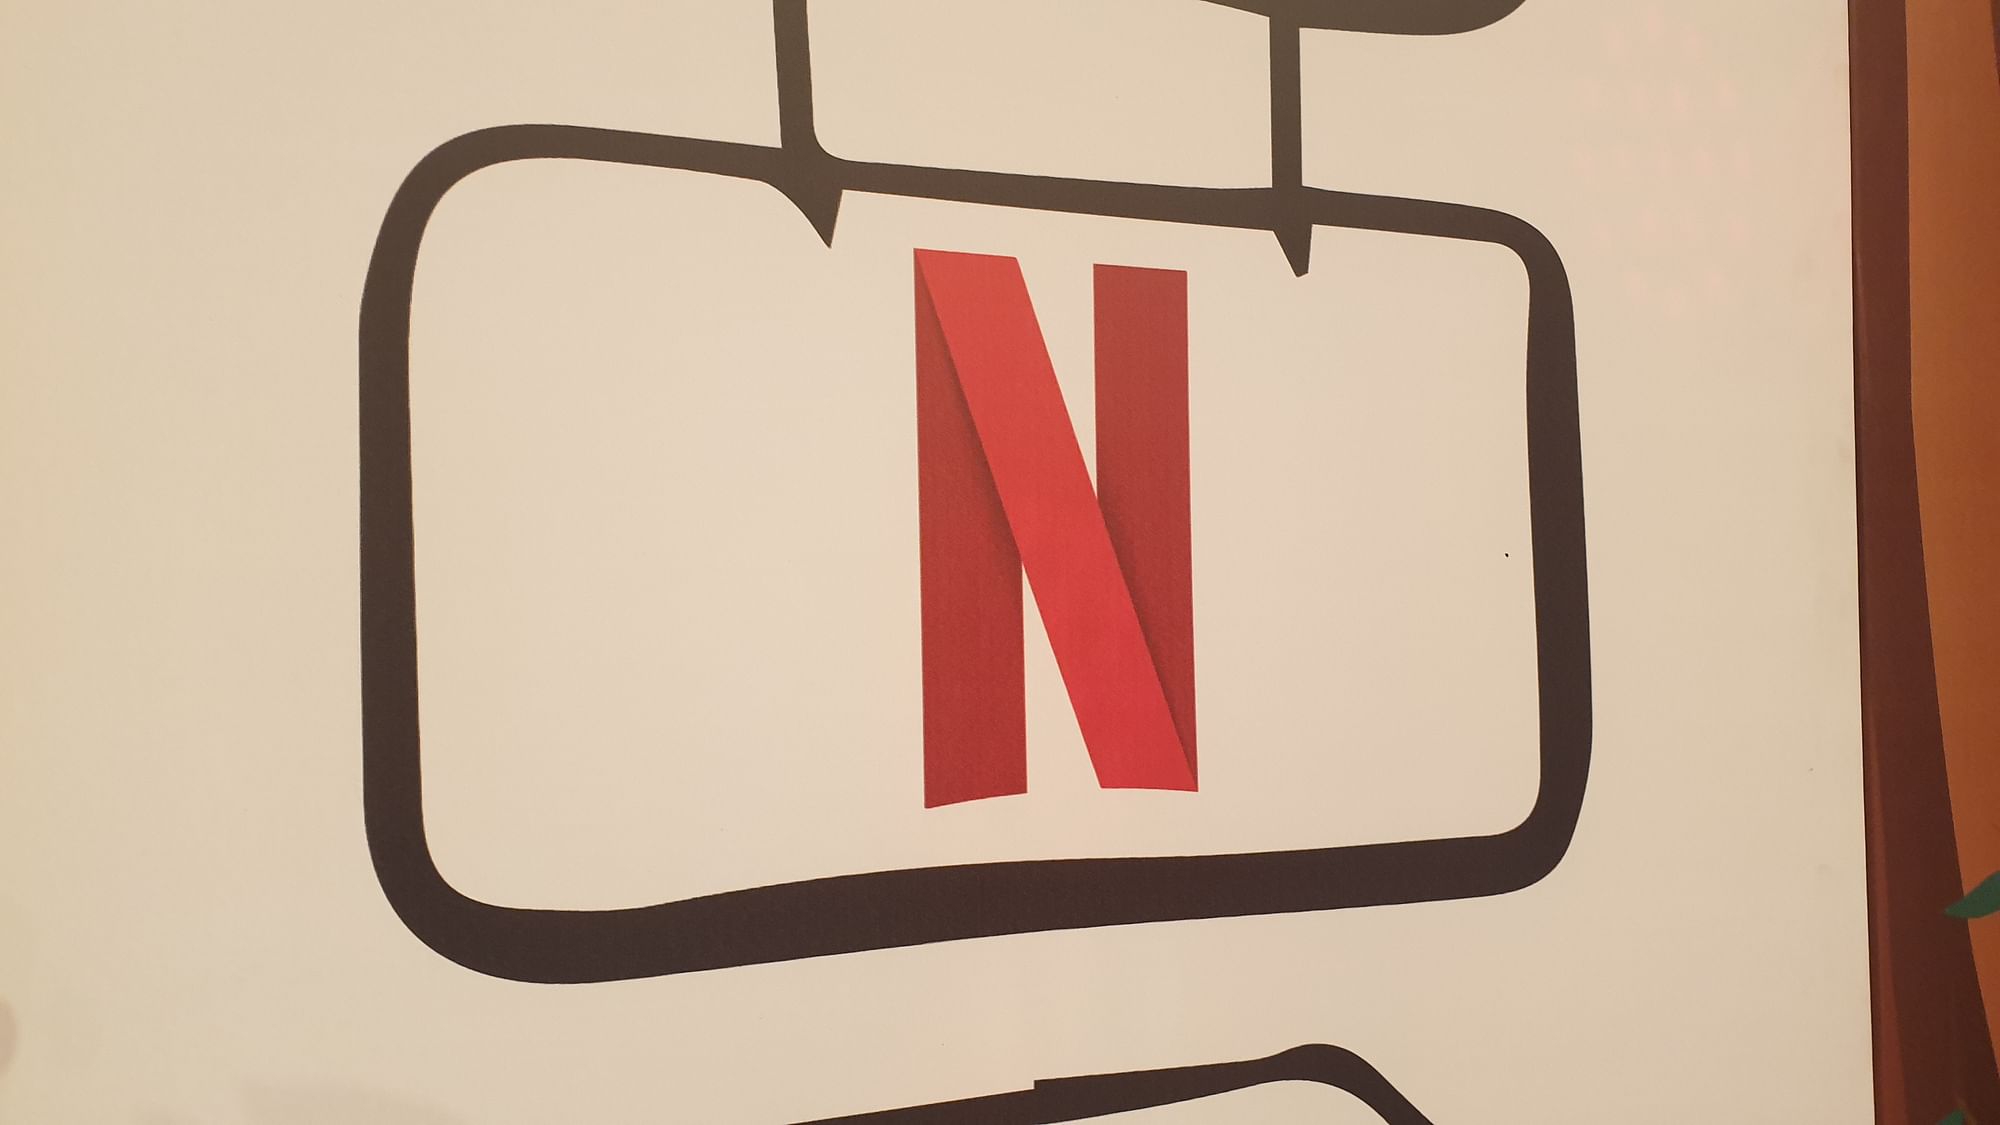 The new Netflix+ plan supports only one screen.